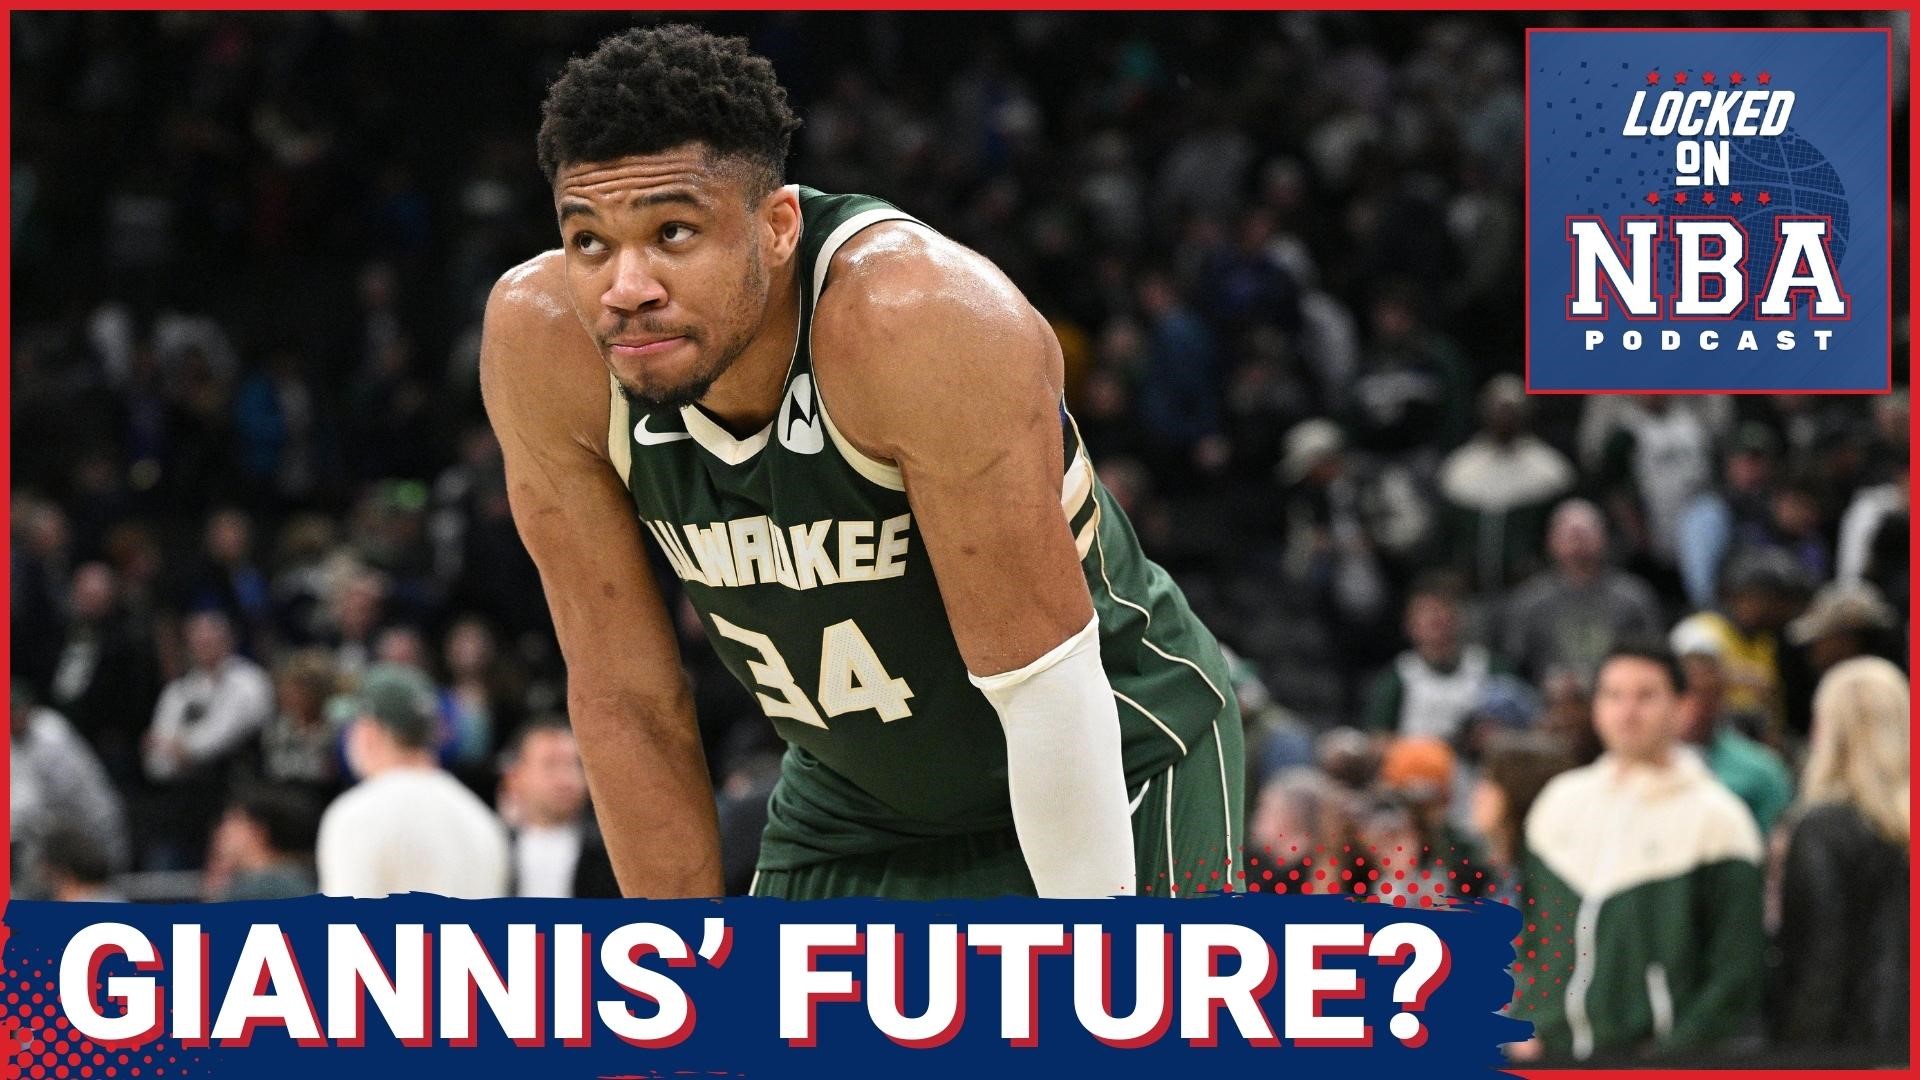 Host Jackson Gatlin is joined by Locked On Bucks, Blazers & Pacers to discuss Giannis' Bucks future, mystery team enters Dame trade talks, Pacers Hield trade options